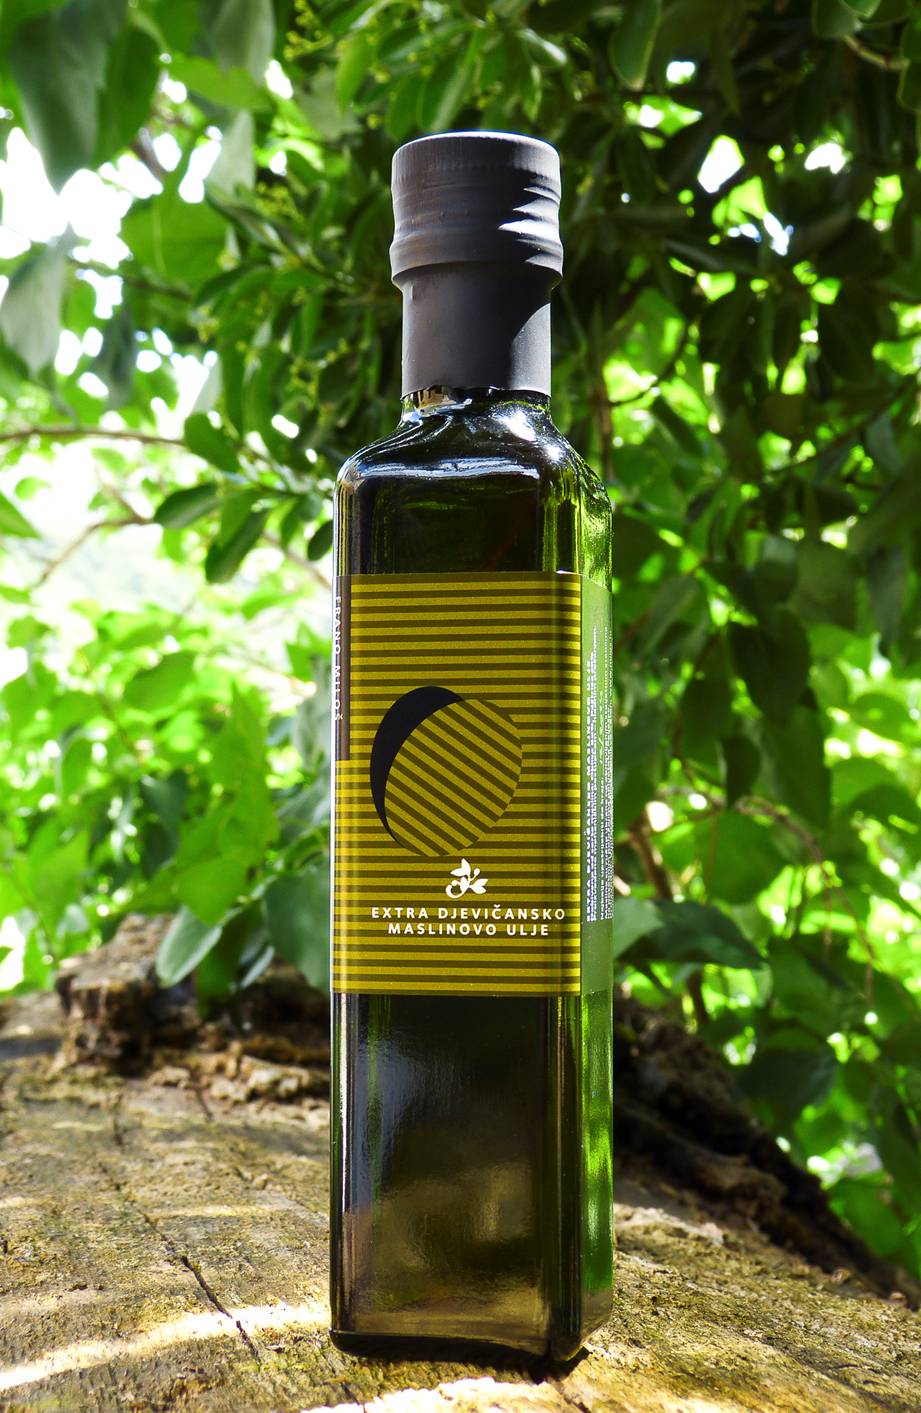 Olive Oil From Peljesac Won A Gold Medal On A Competition In New York ...